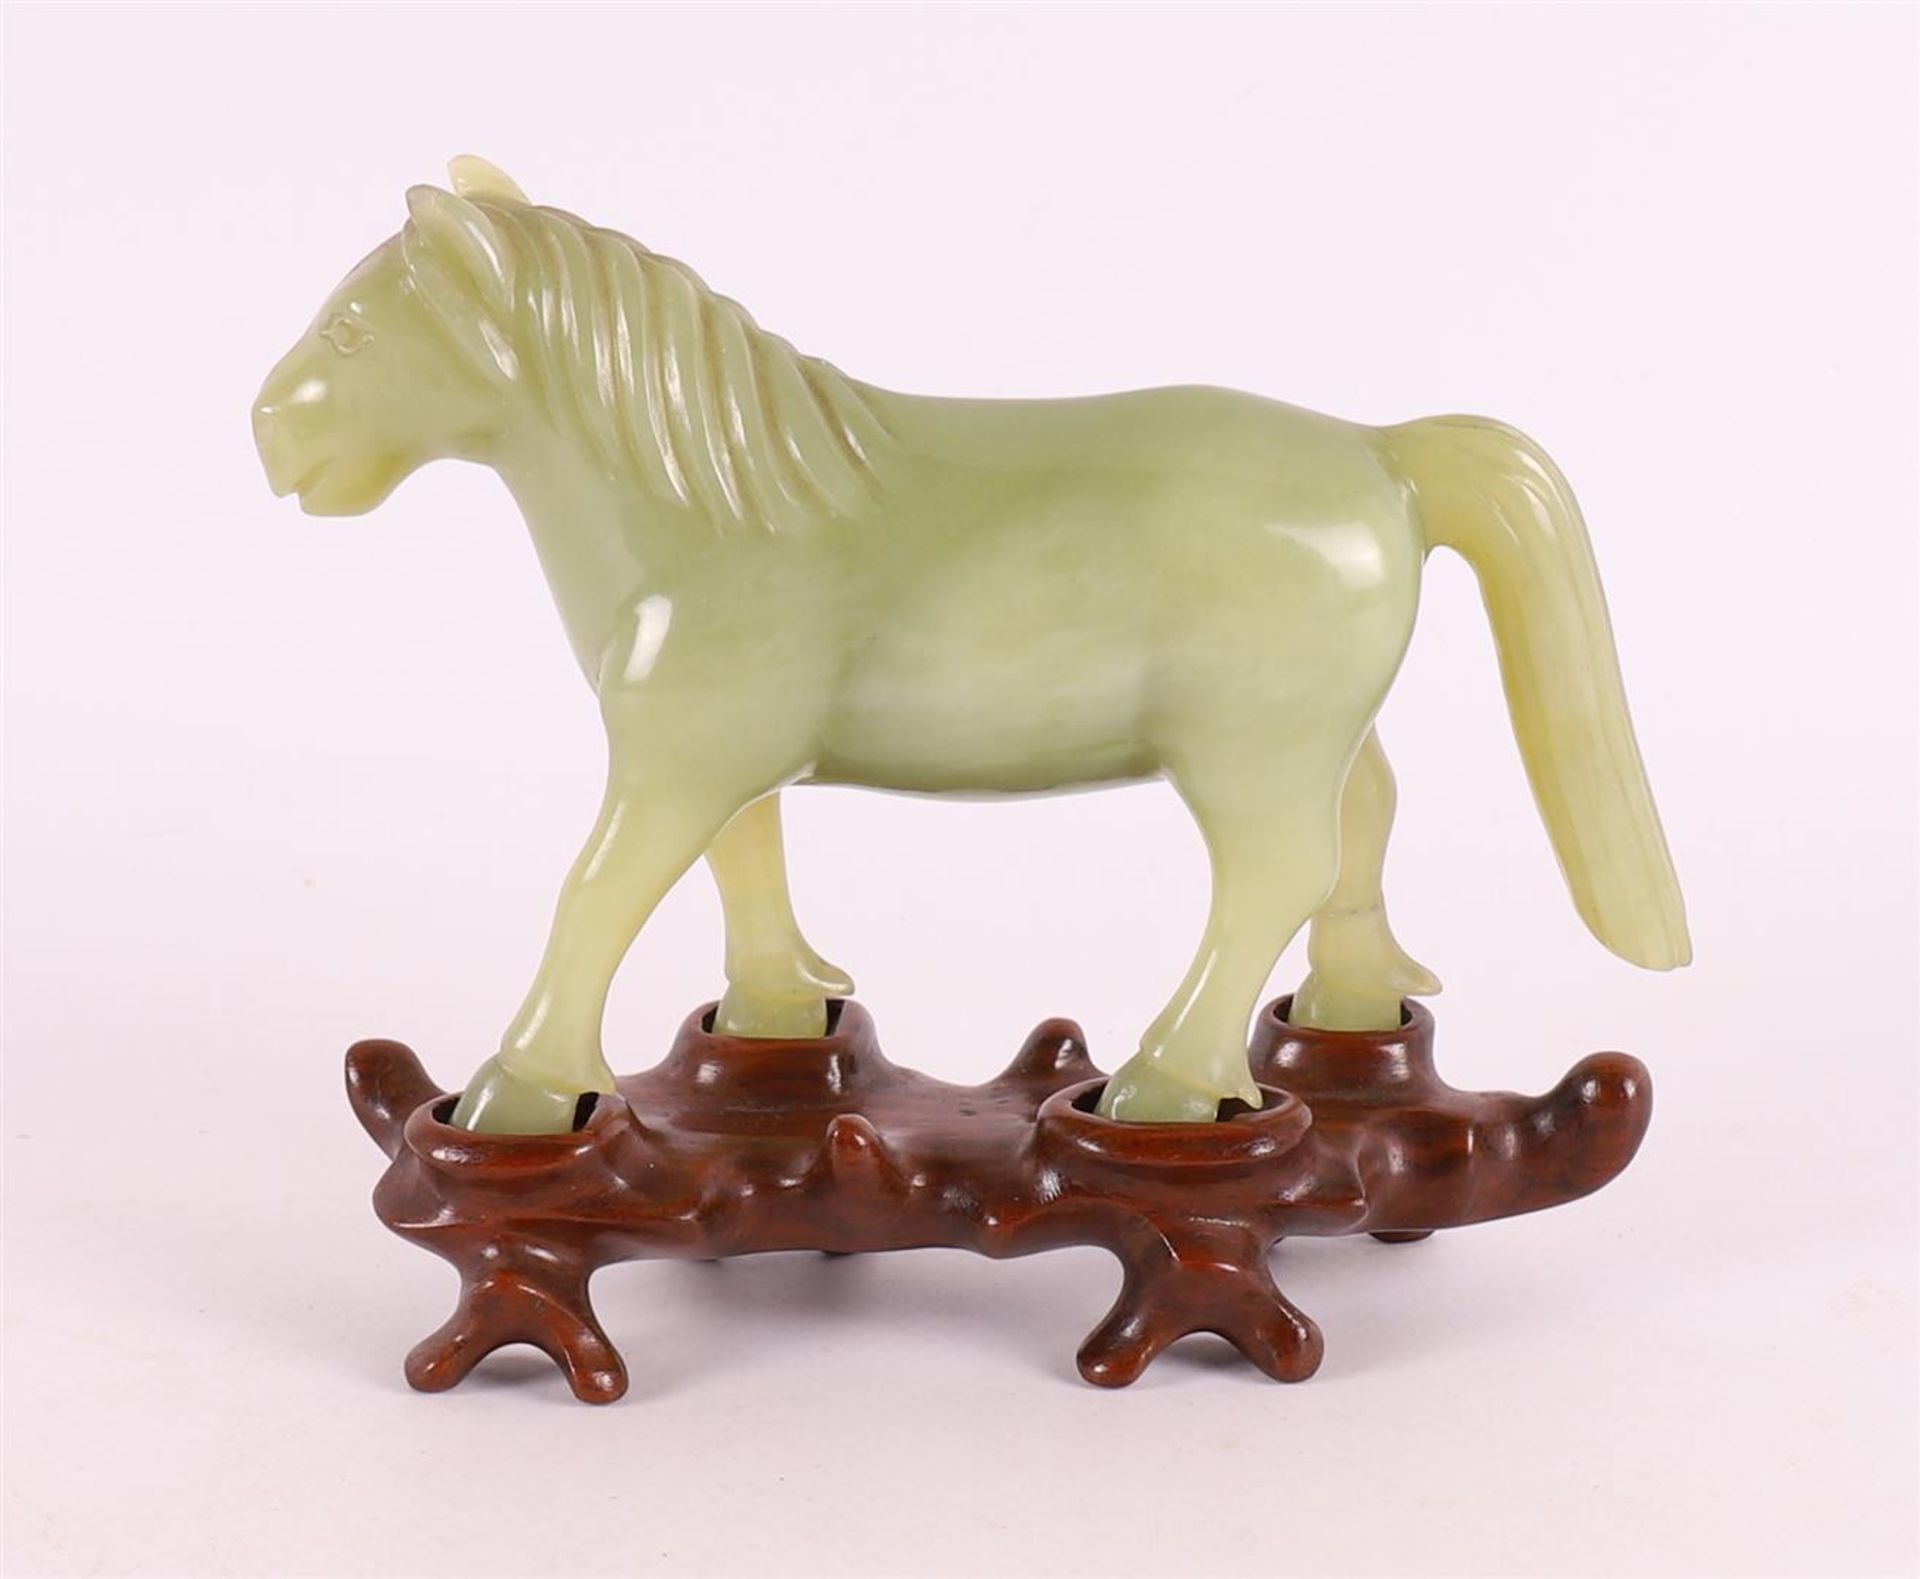 A green jade horse on a tropical wooden loose pedestal, China, around 1900. - Image 2 of 6